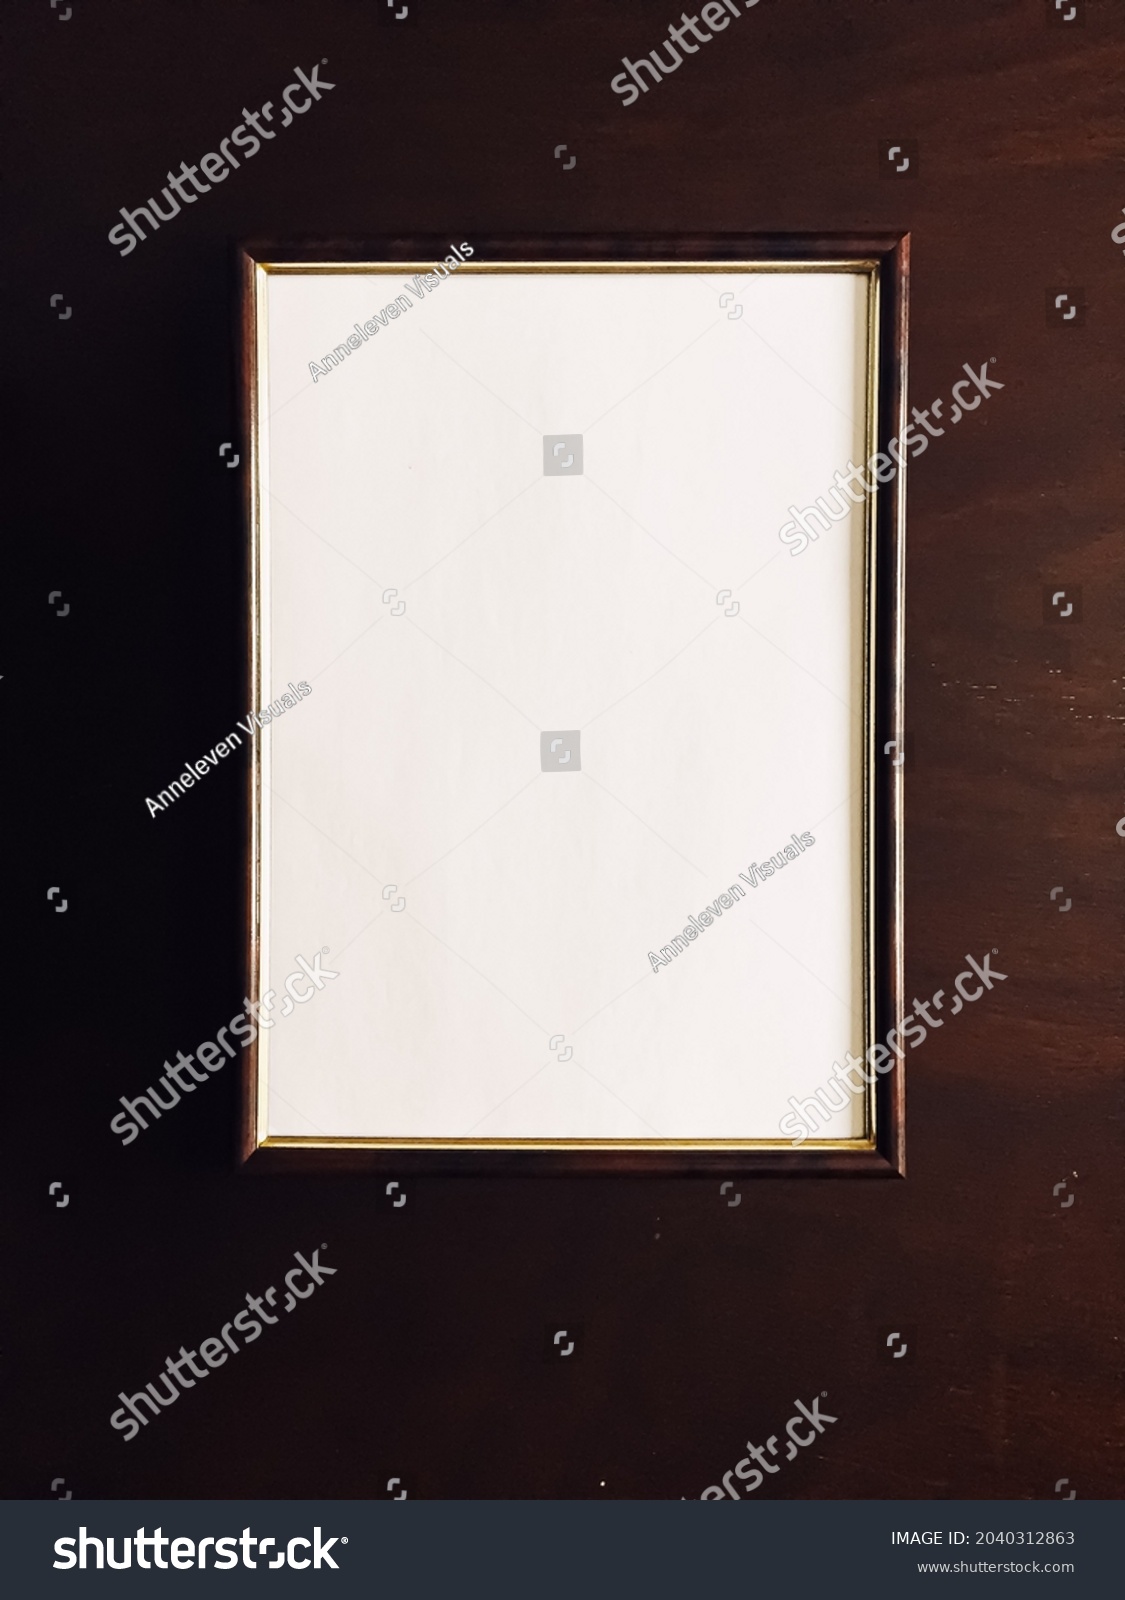 Blank picture frame on wooden background, luxury home decor and interior design, poster print and printable art mockup. #2040312863